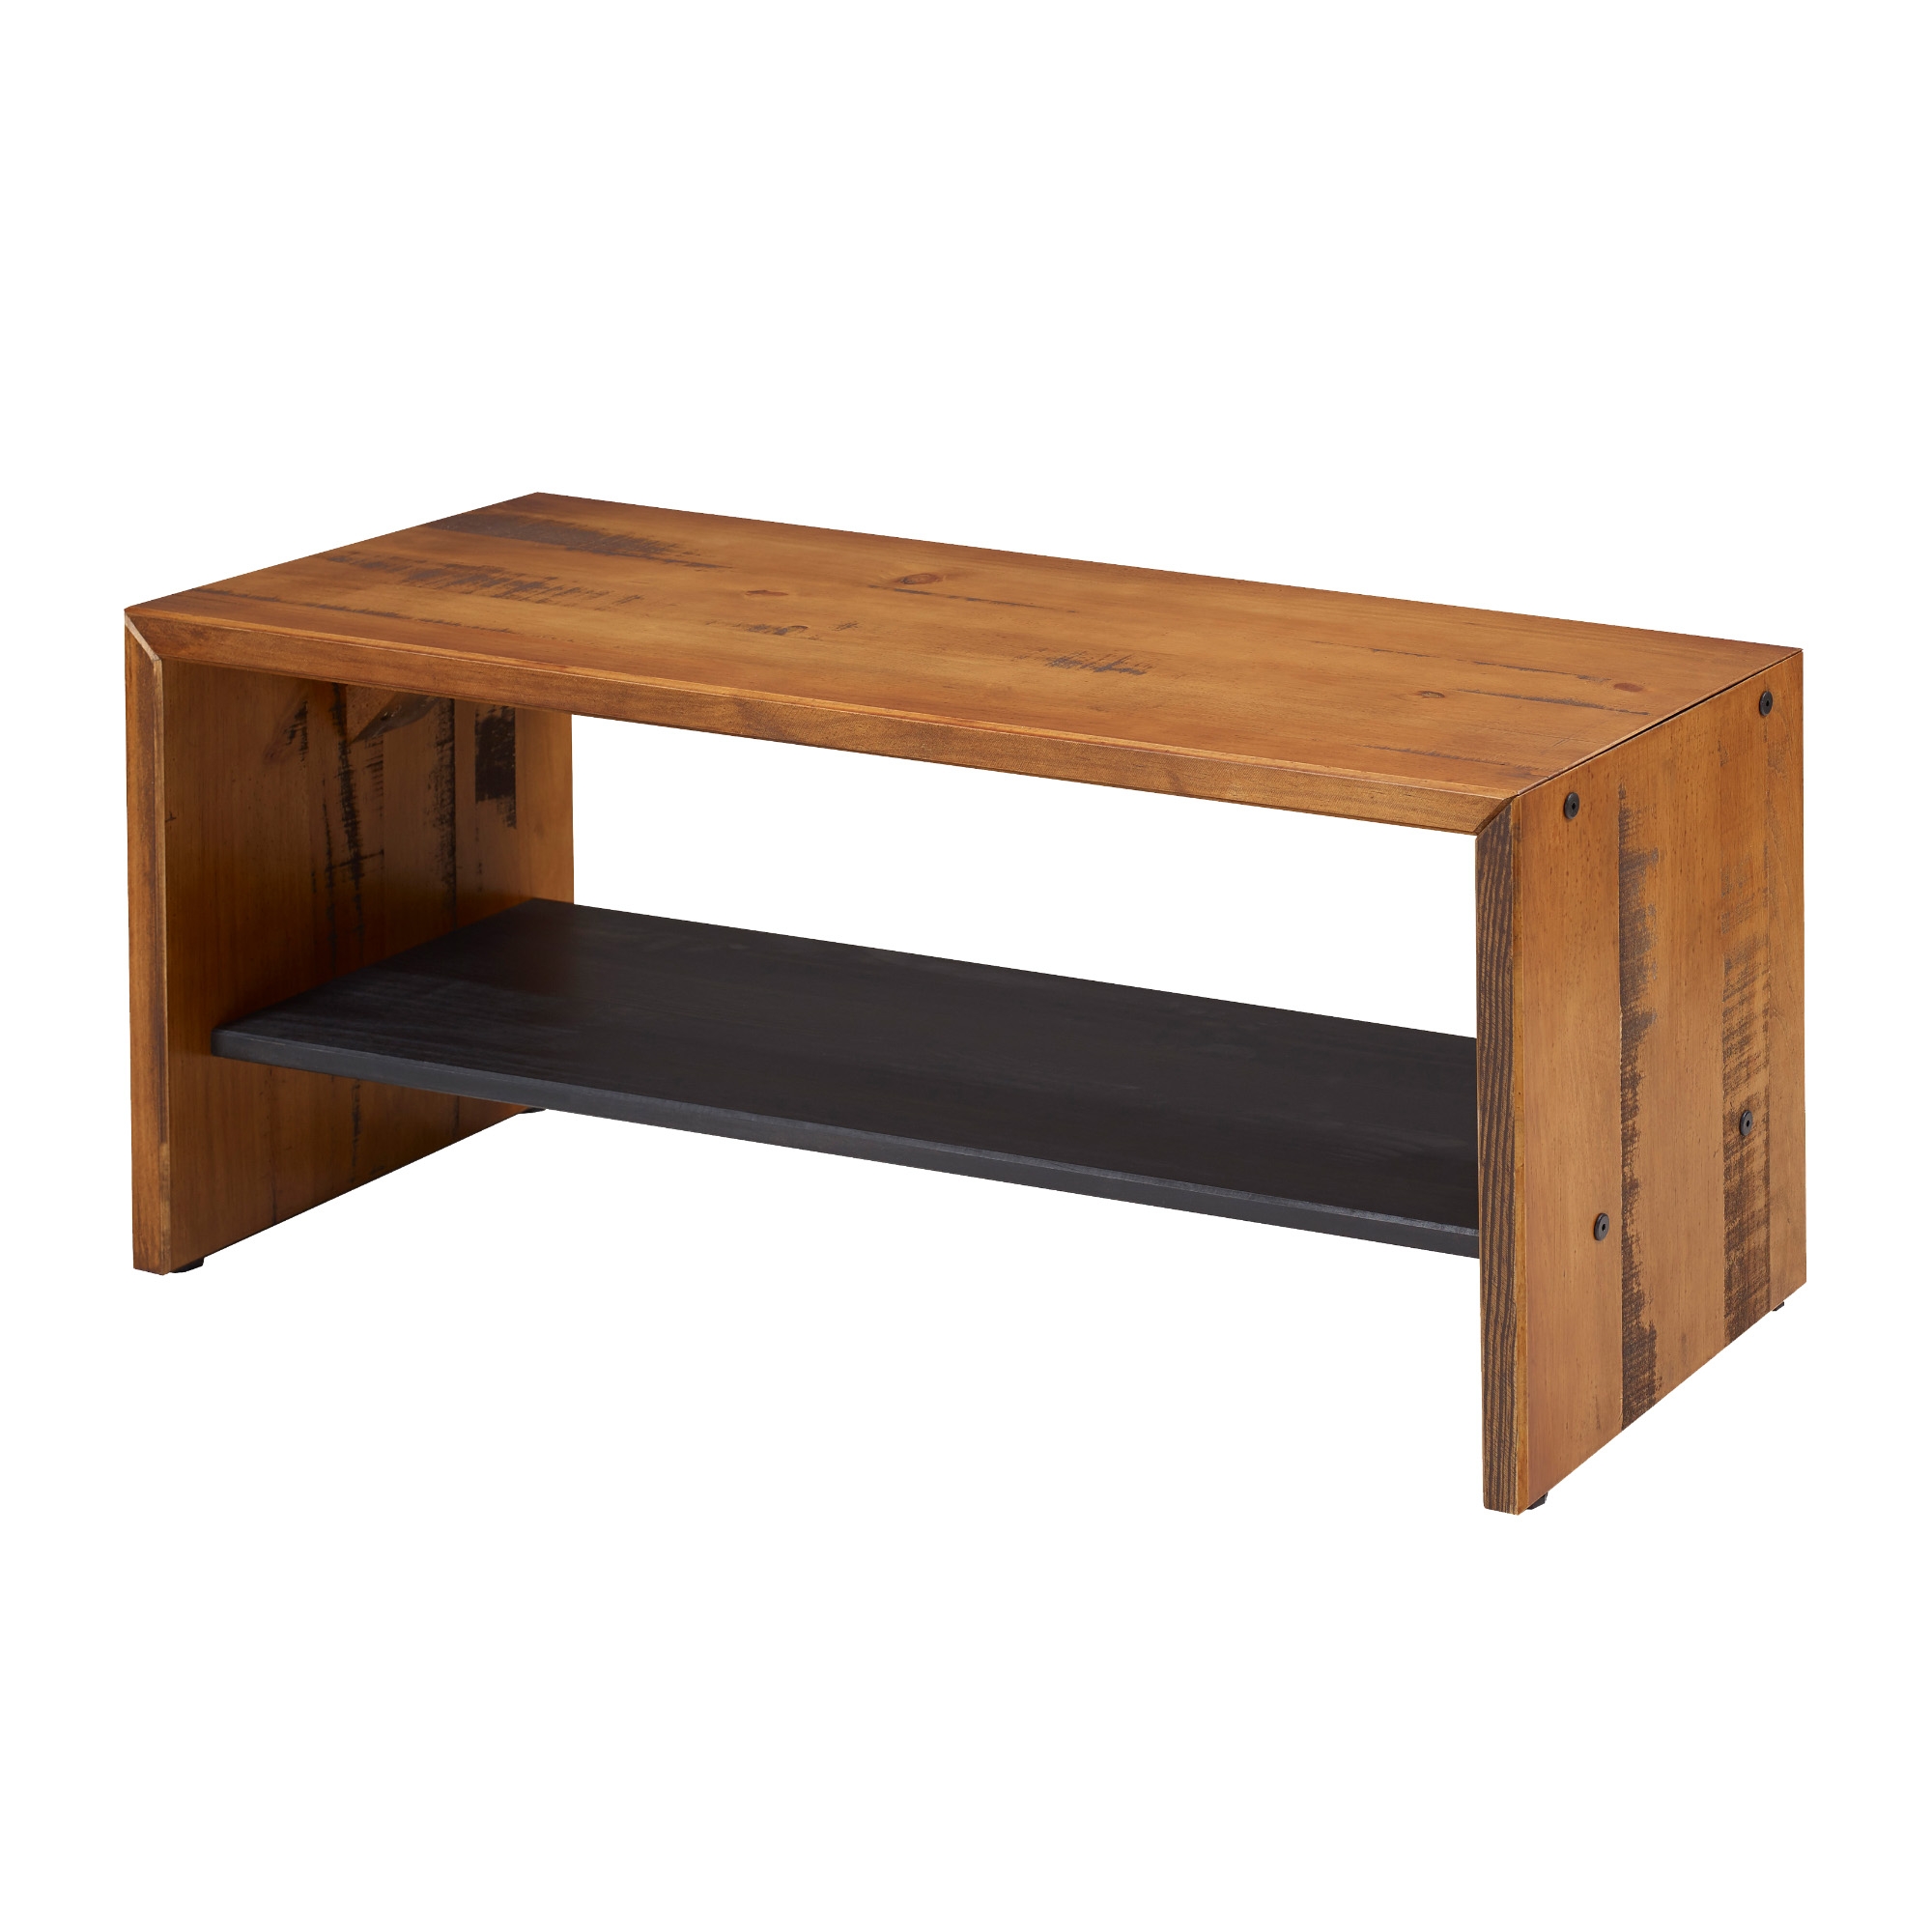 Alpine 42" Rustic Two-Tone Solid Wood Entry Bench - Amber - Image 2